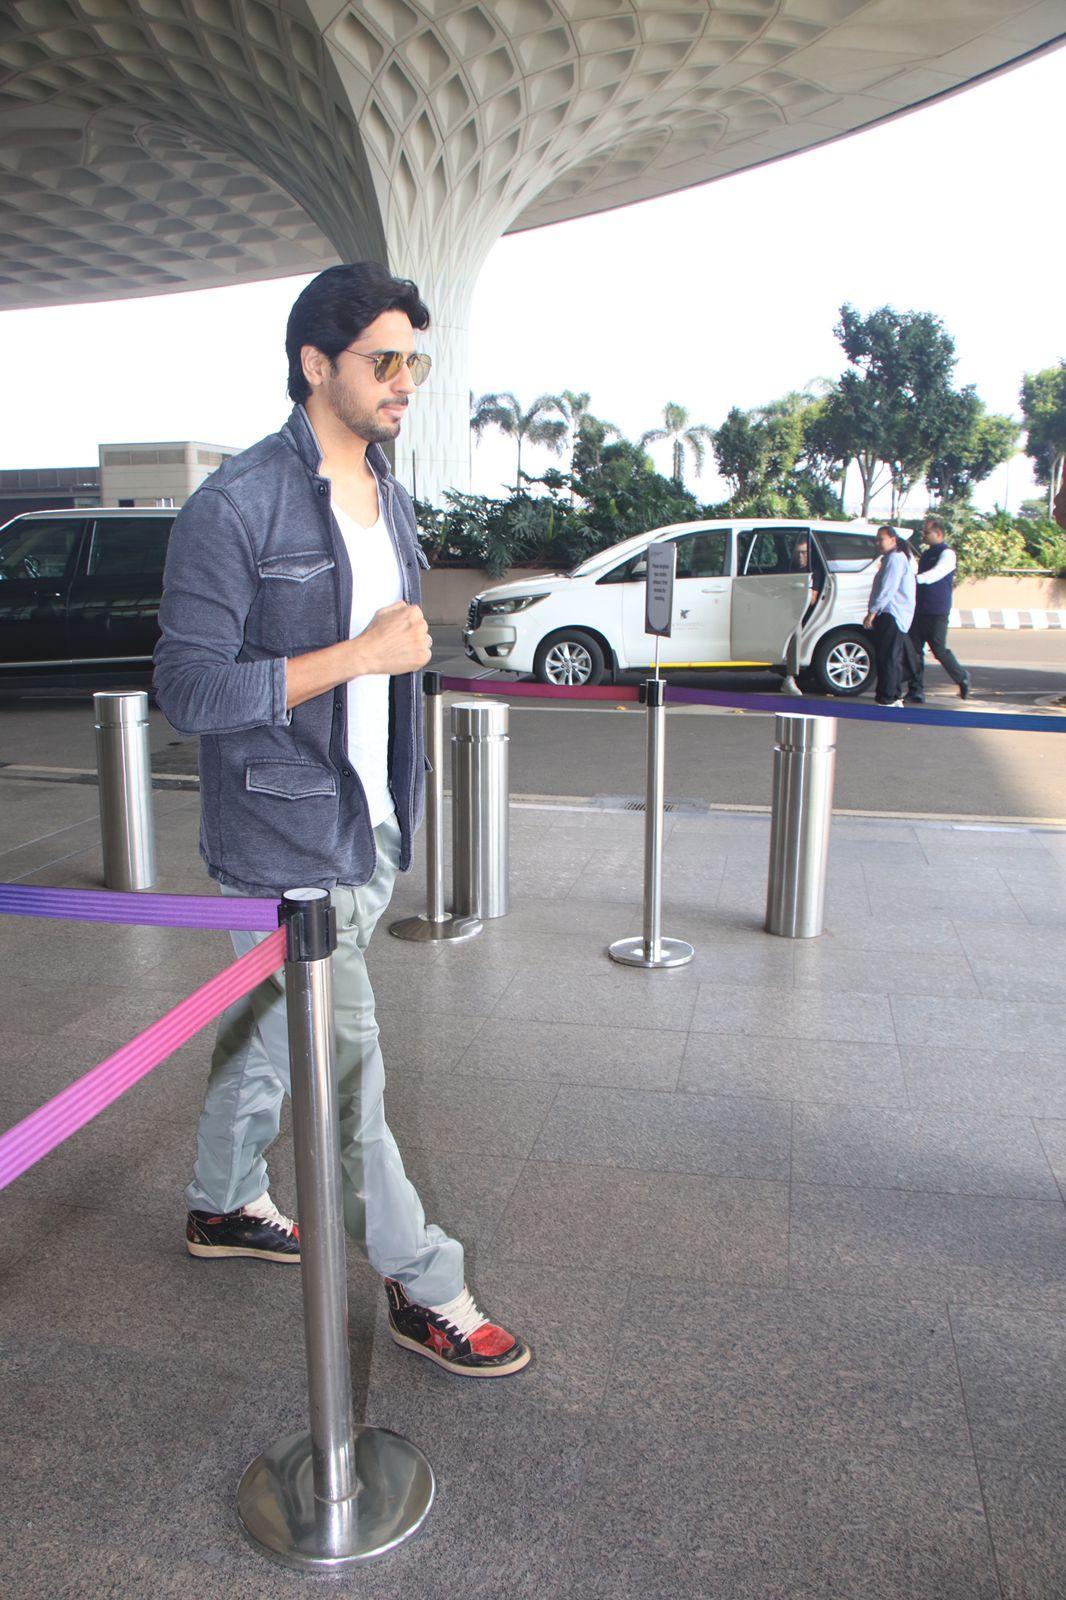 The actor opted for an all-casual look as he jetted off